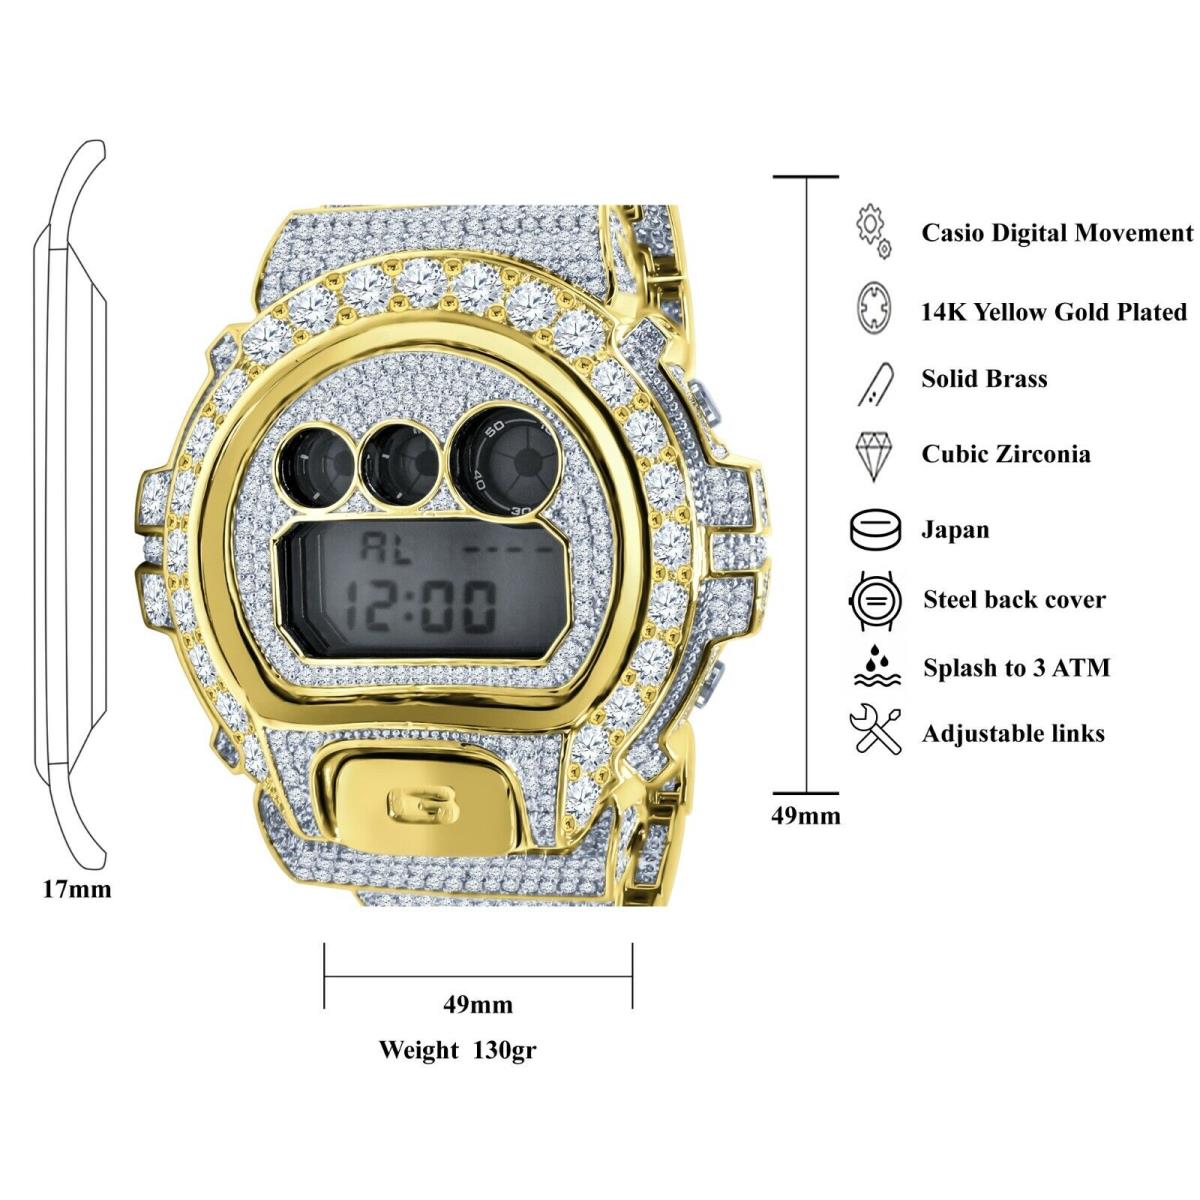 Icy White Solitaire On Yellow Gold Finish Casio G-shock DW-6900 Watch